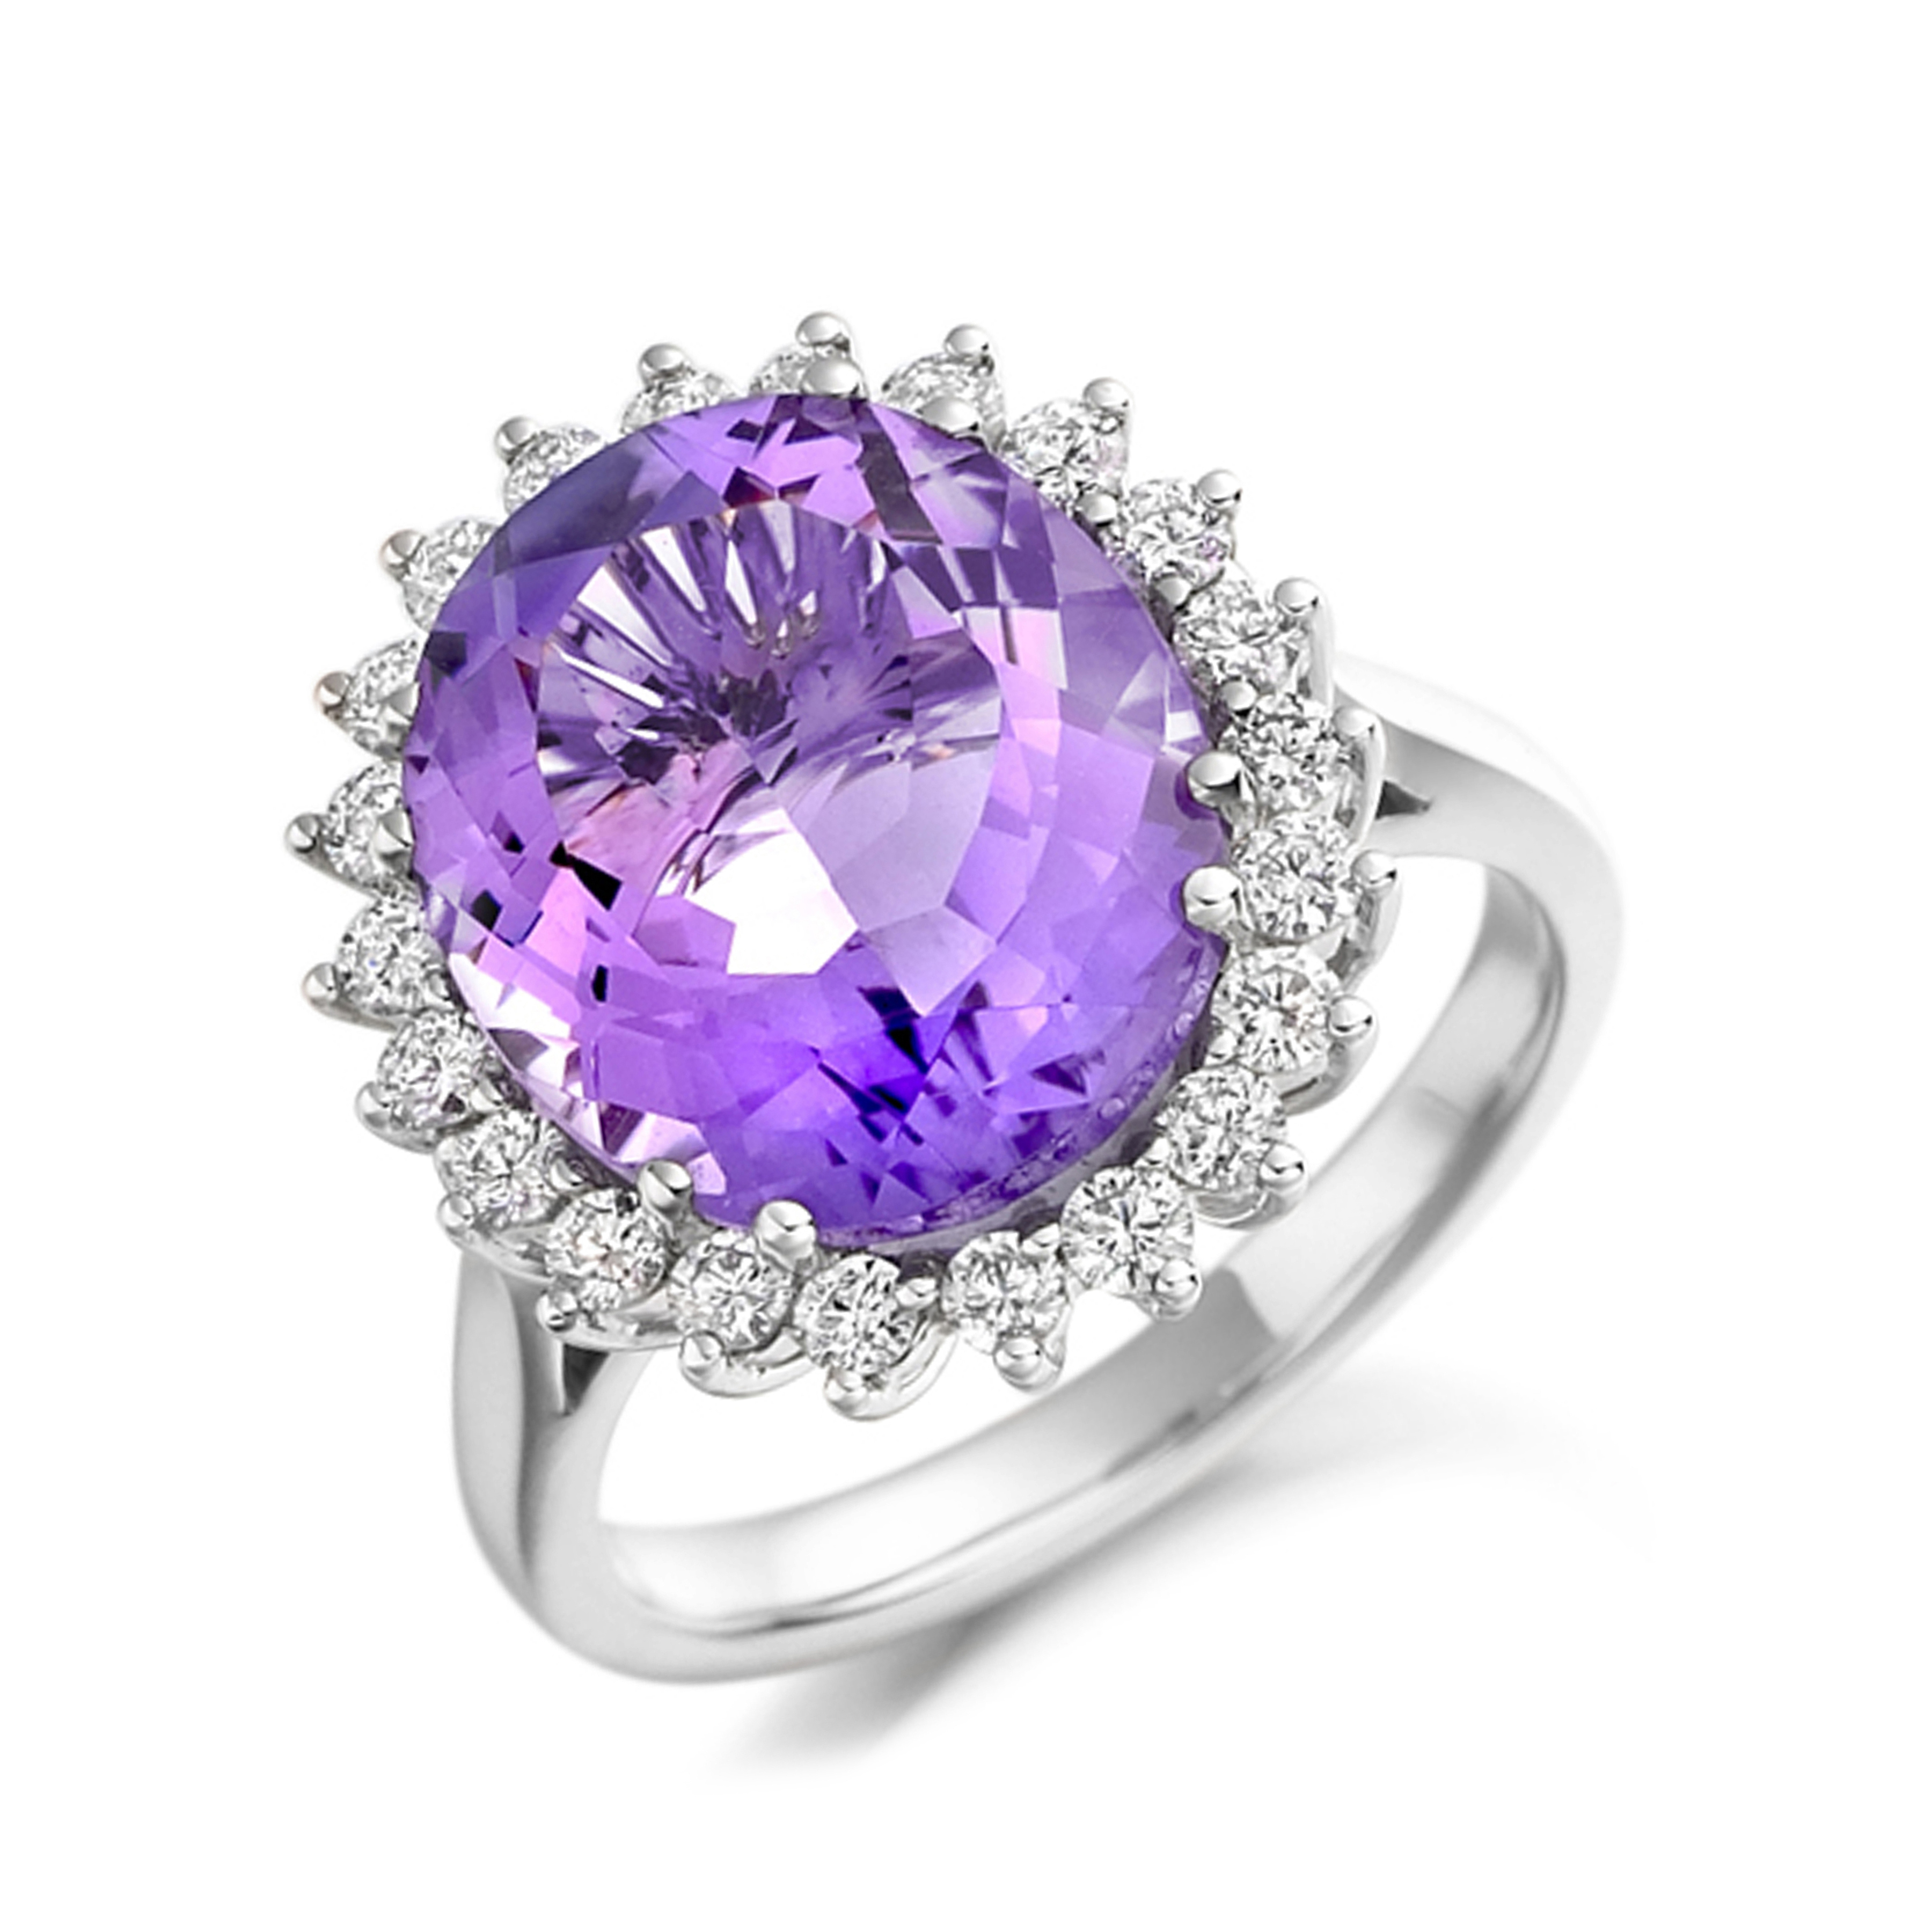 10X9mm Oval Amethyst Hand Wired Diamond And Gemstone Ring